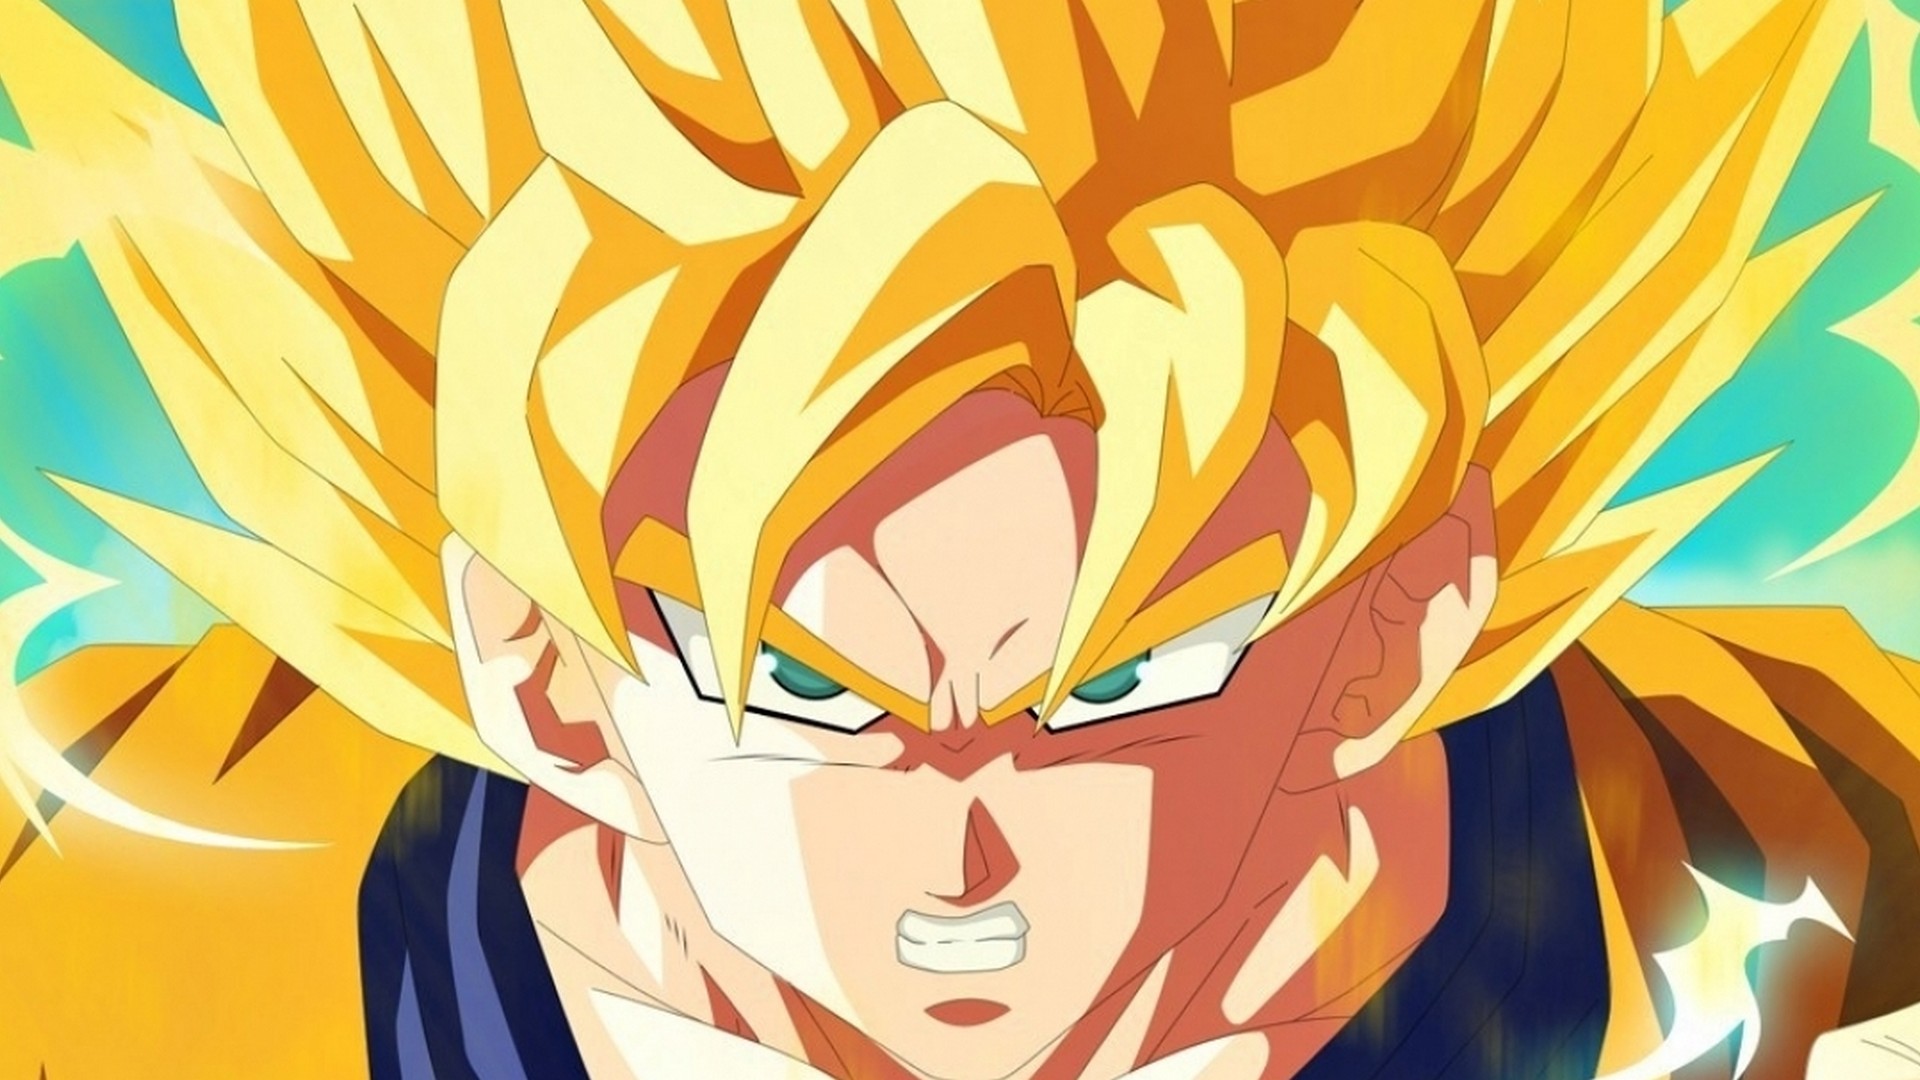 Goku Super Saiyan Desktop Backgrounds HD with image resolution 1920x1080 pixel. You can use this wallpaper as background for your desktop Computer Screensavers, Android or iPhone smartphones